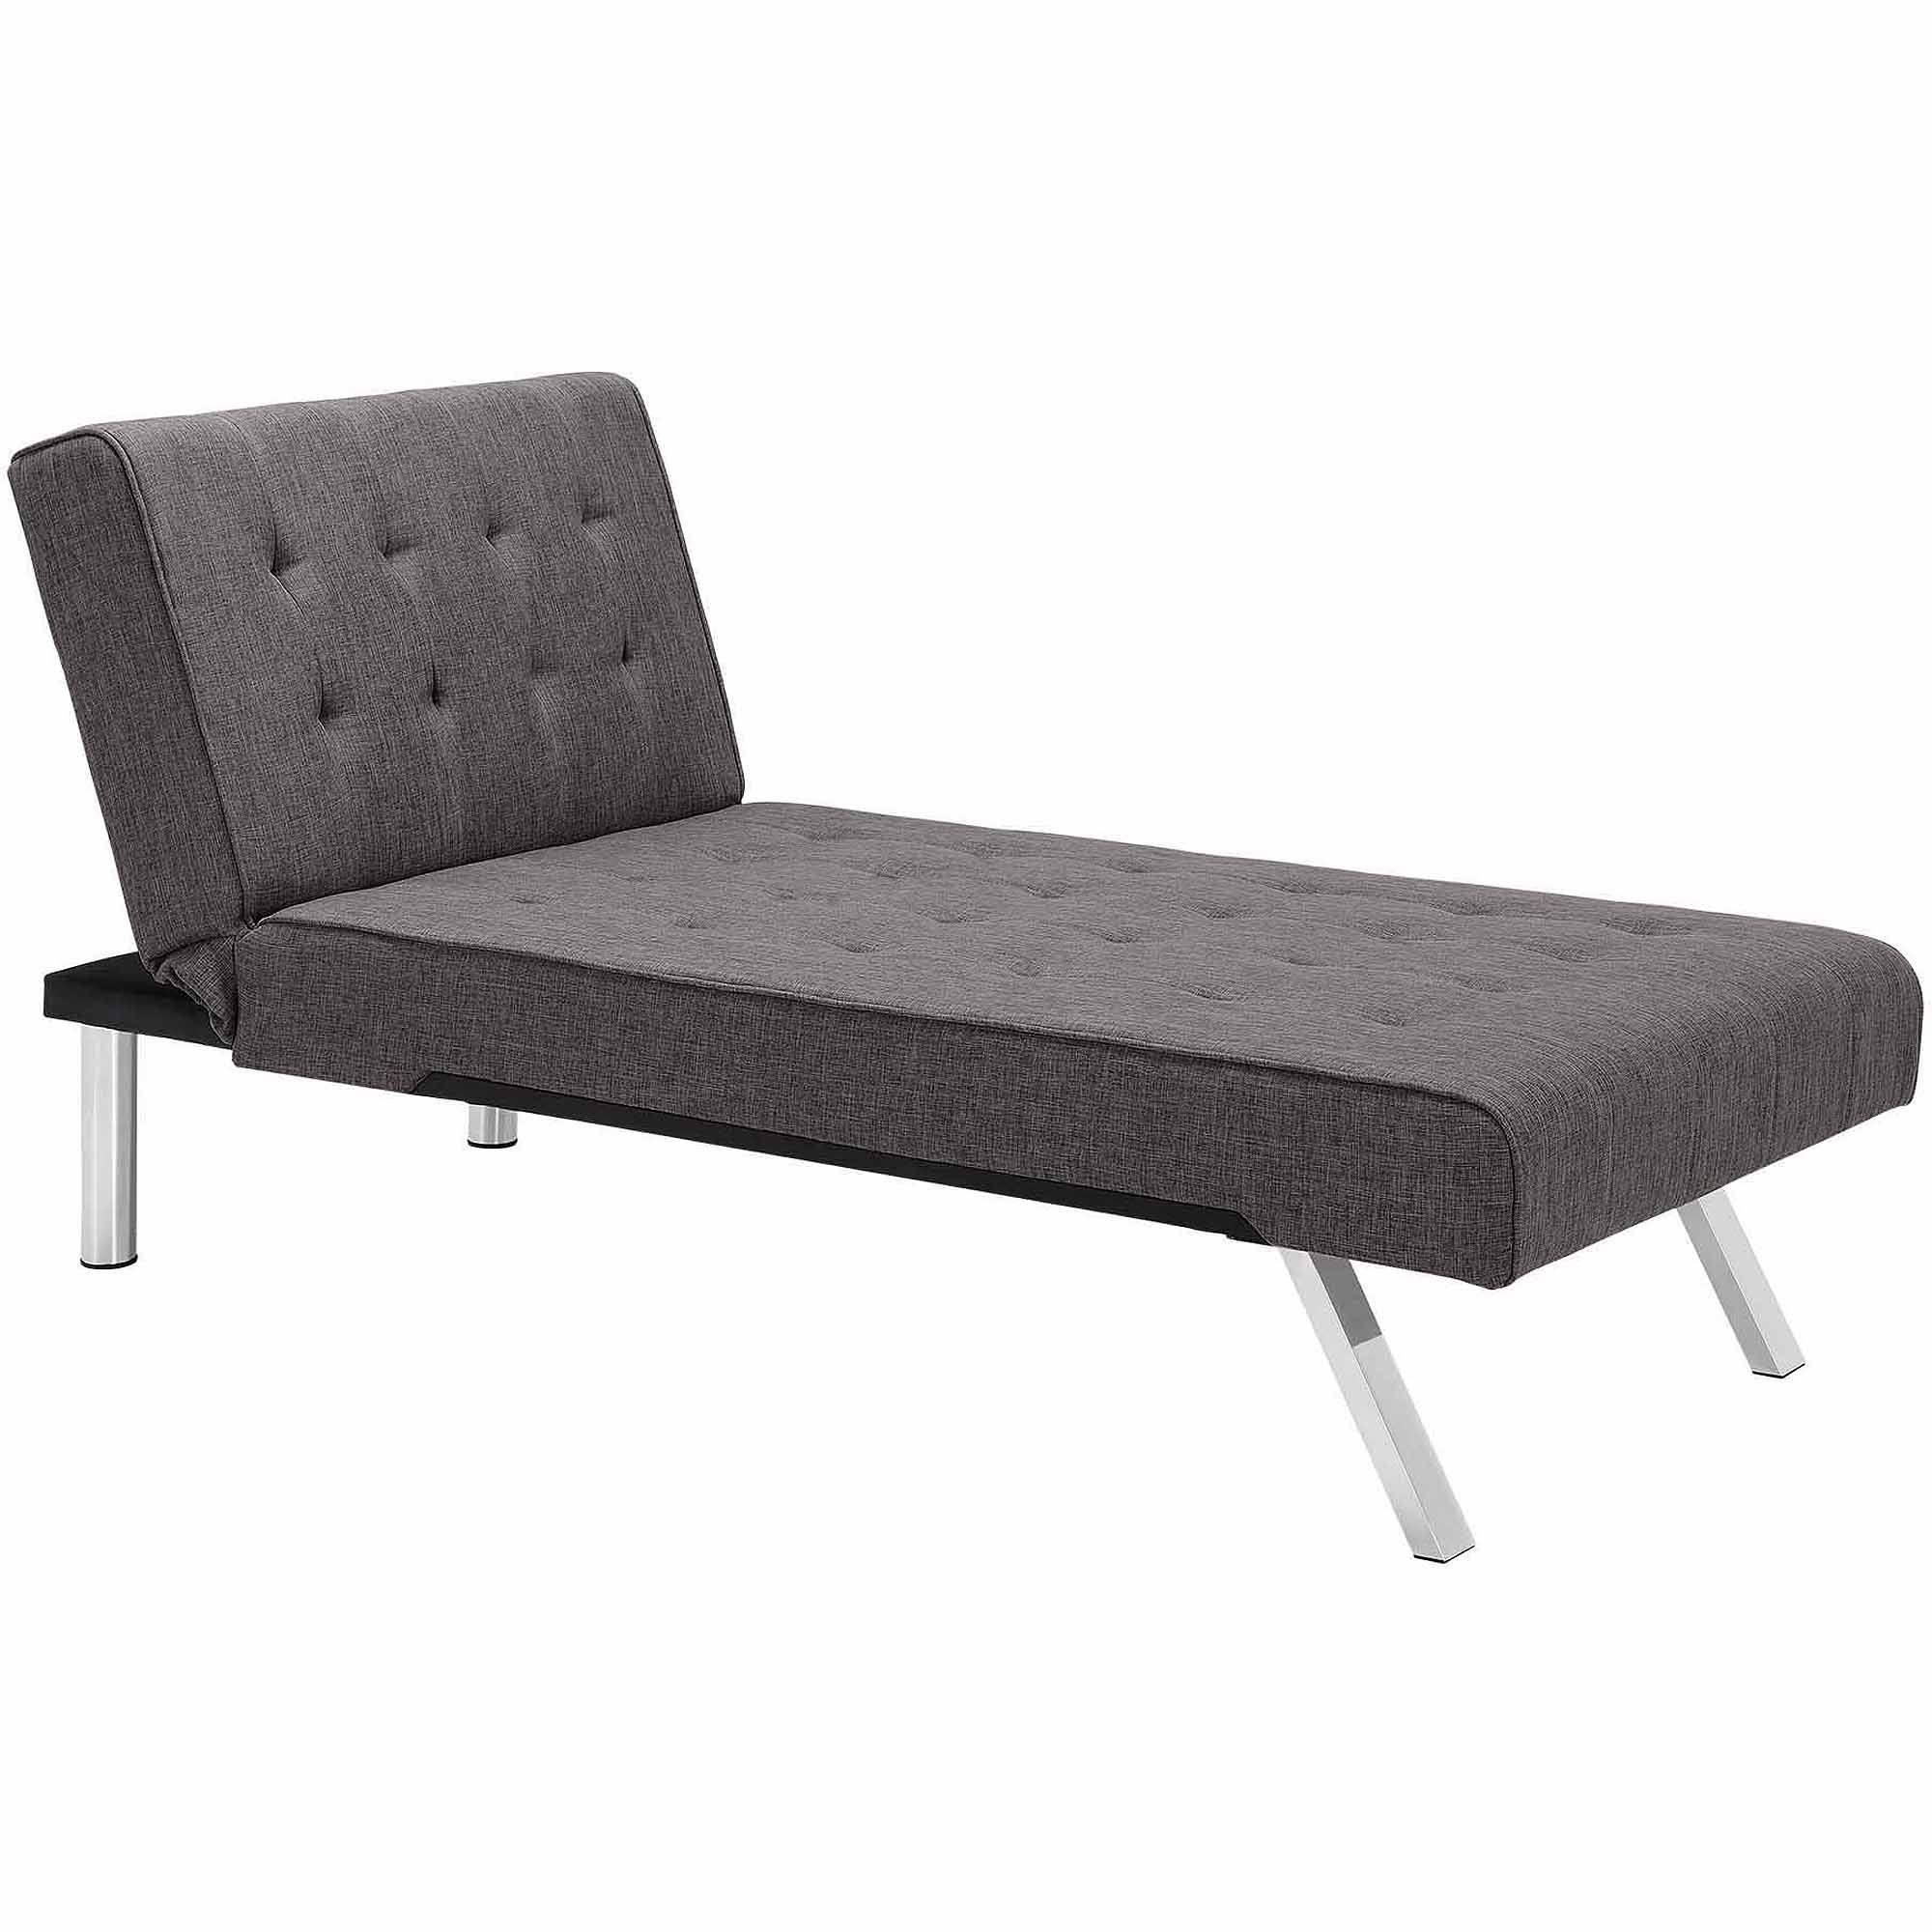 Trendy Dhp Emily Futon Chaise Lounger, Multiple Colors – Walmart Pertaining To Emily Chaises (View 3 of 15)